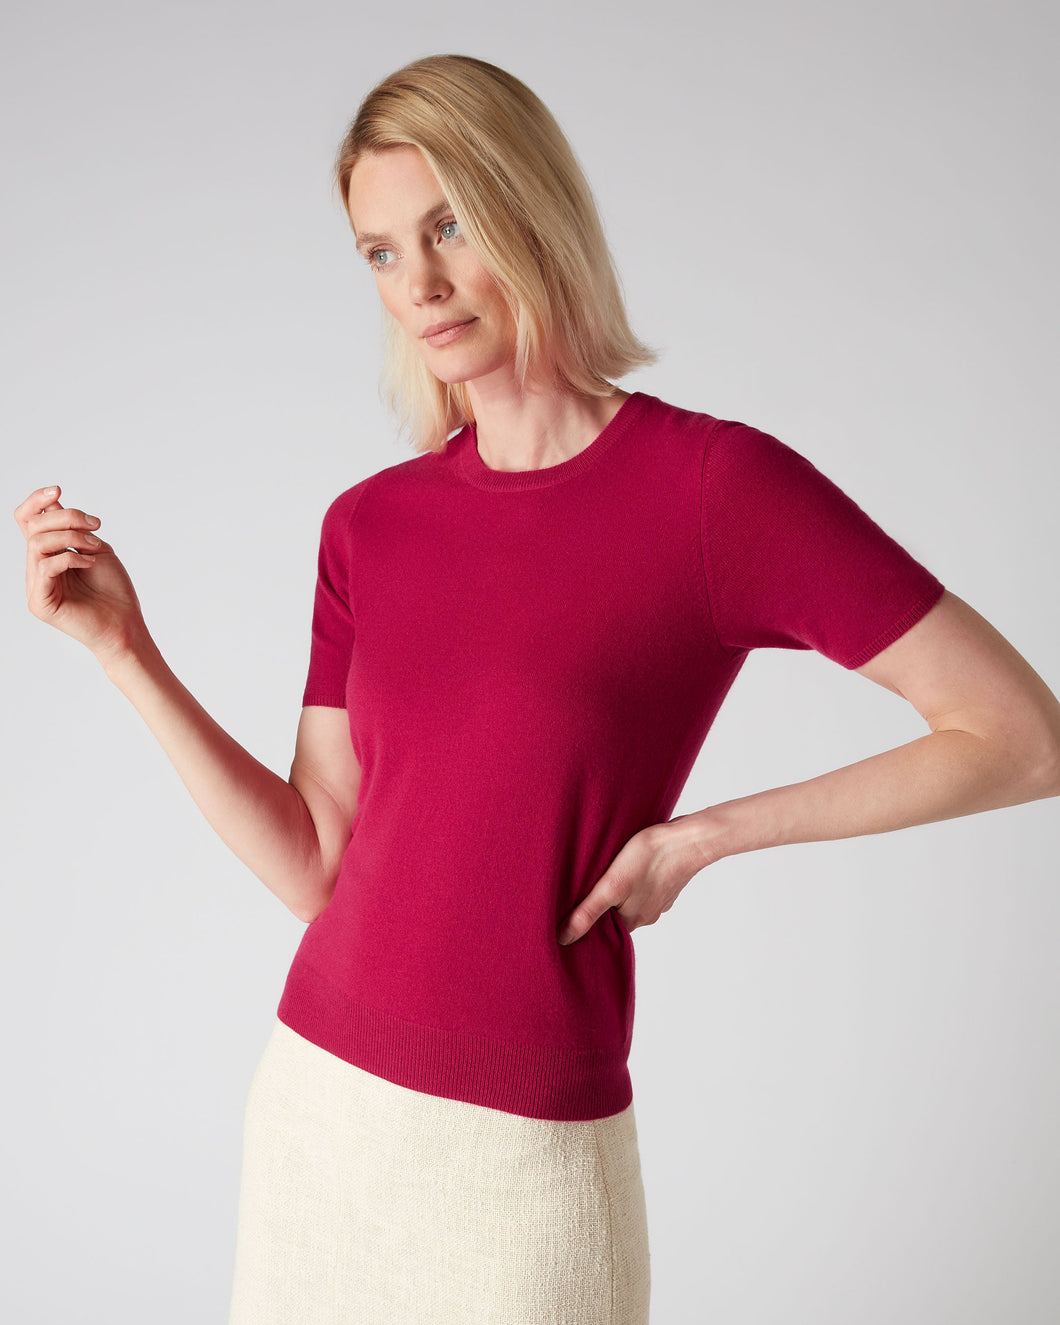 N.Peal Women's Round Neck Cashmere T Shirt Raspberry Pink